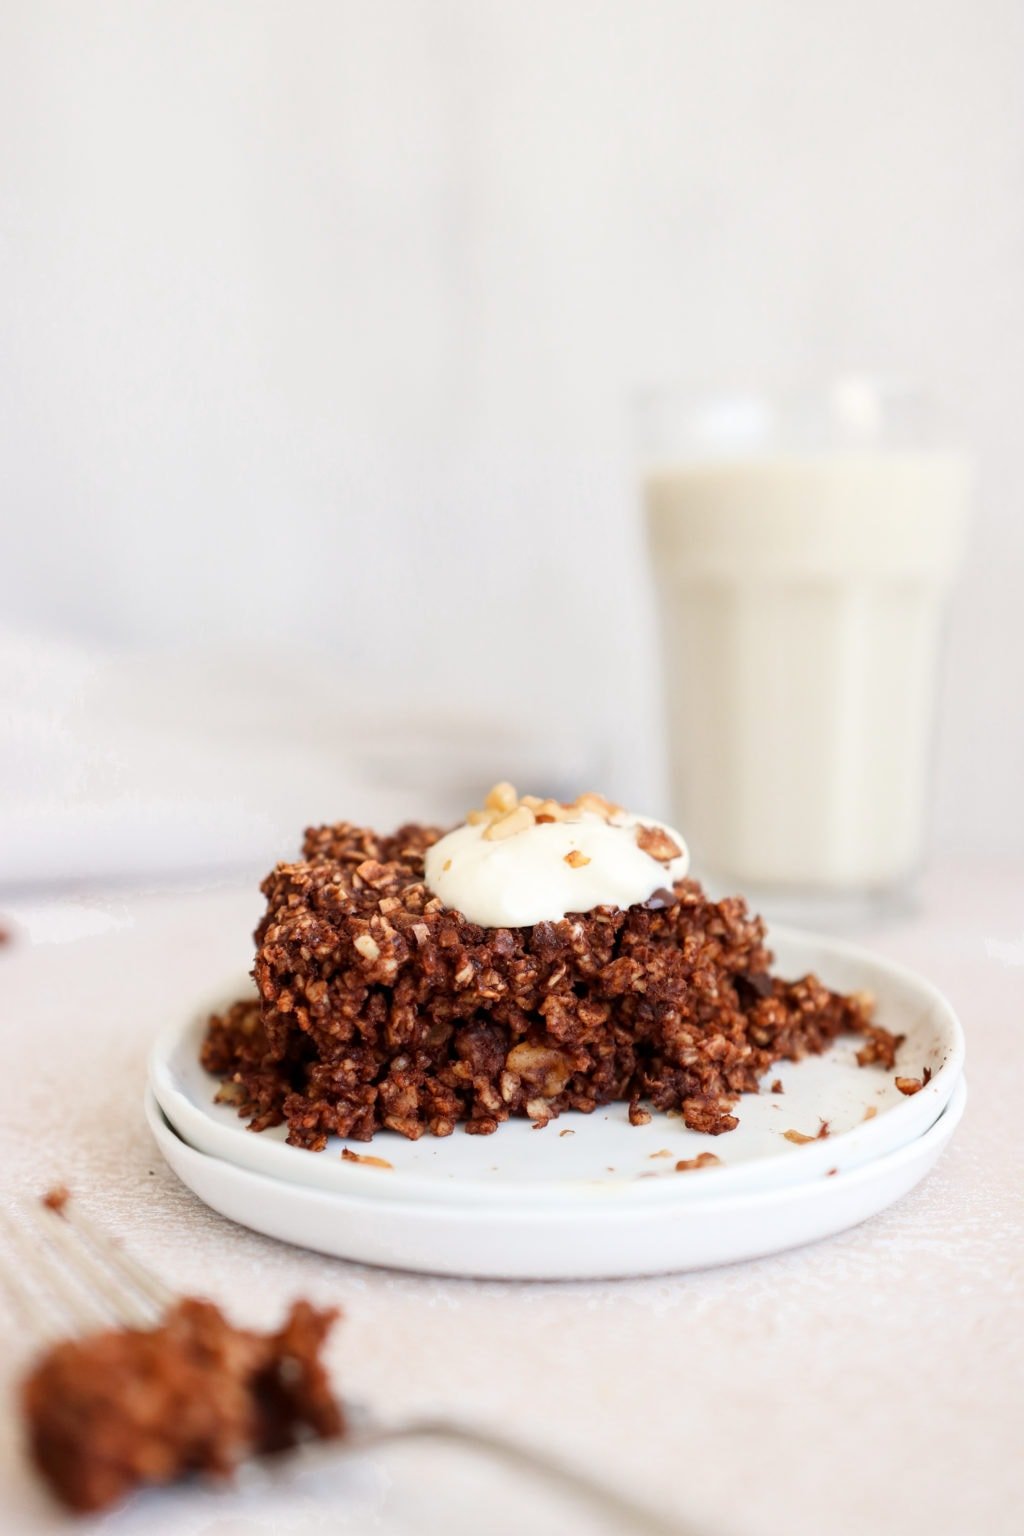 Chocolate baked oatmeal on two white plates with a glass of milk behind it. Ingredients include: oats, banana, egg, coconut oil, maple syrup, cinnamon, prunes, walnuts.